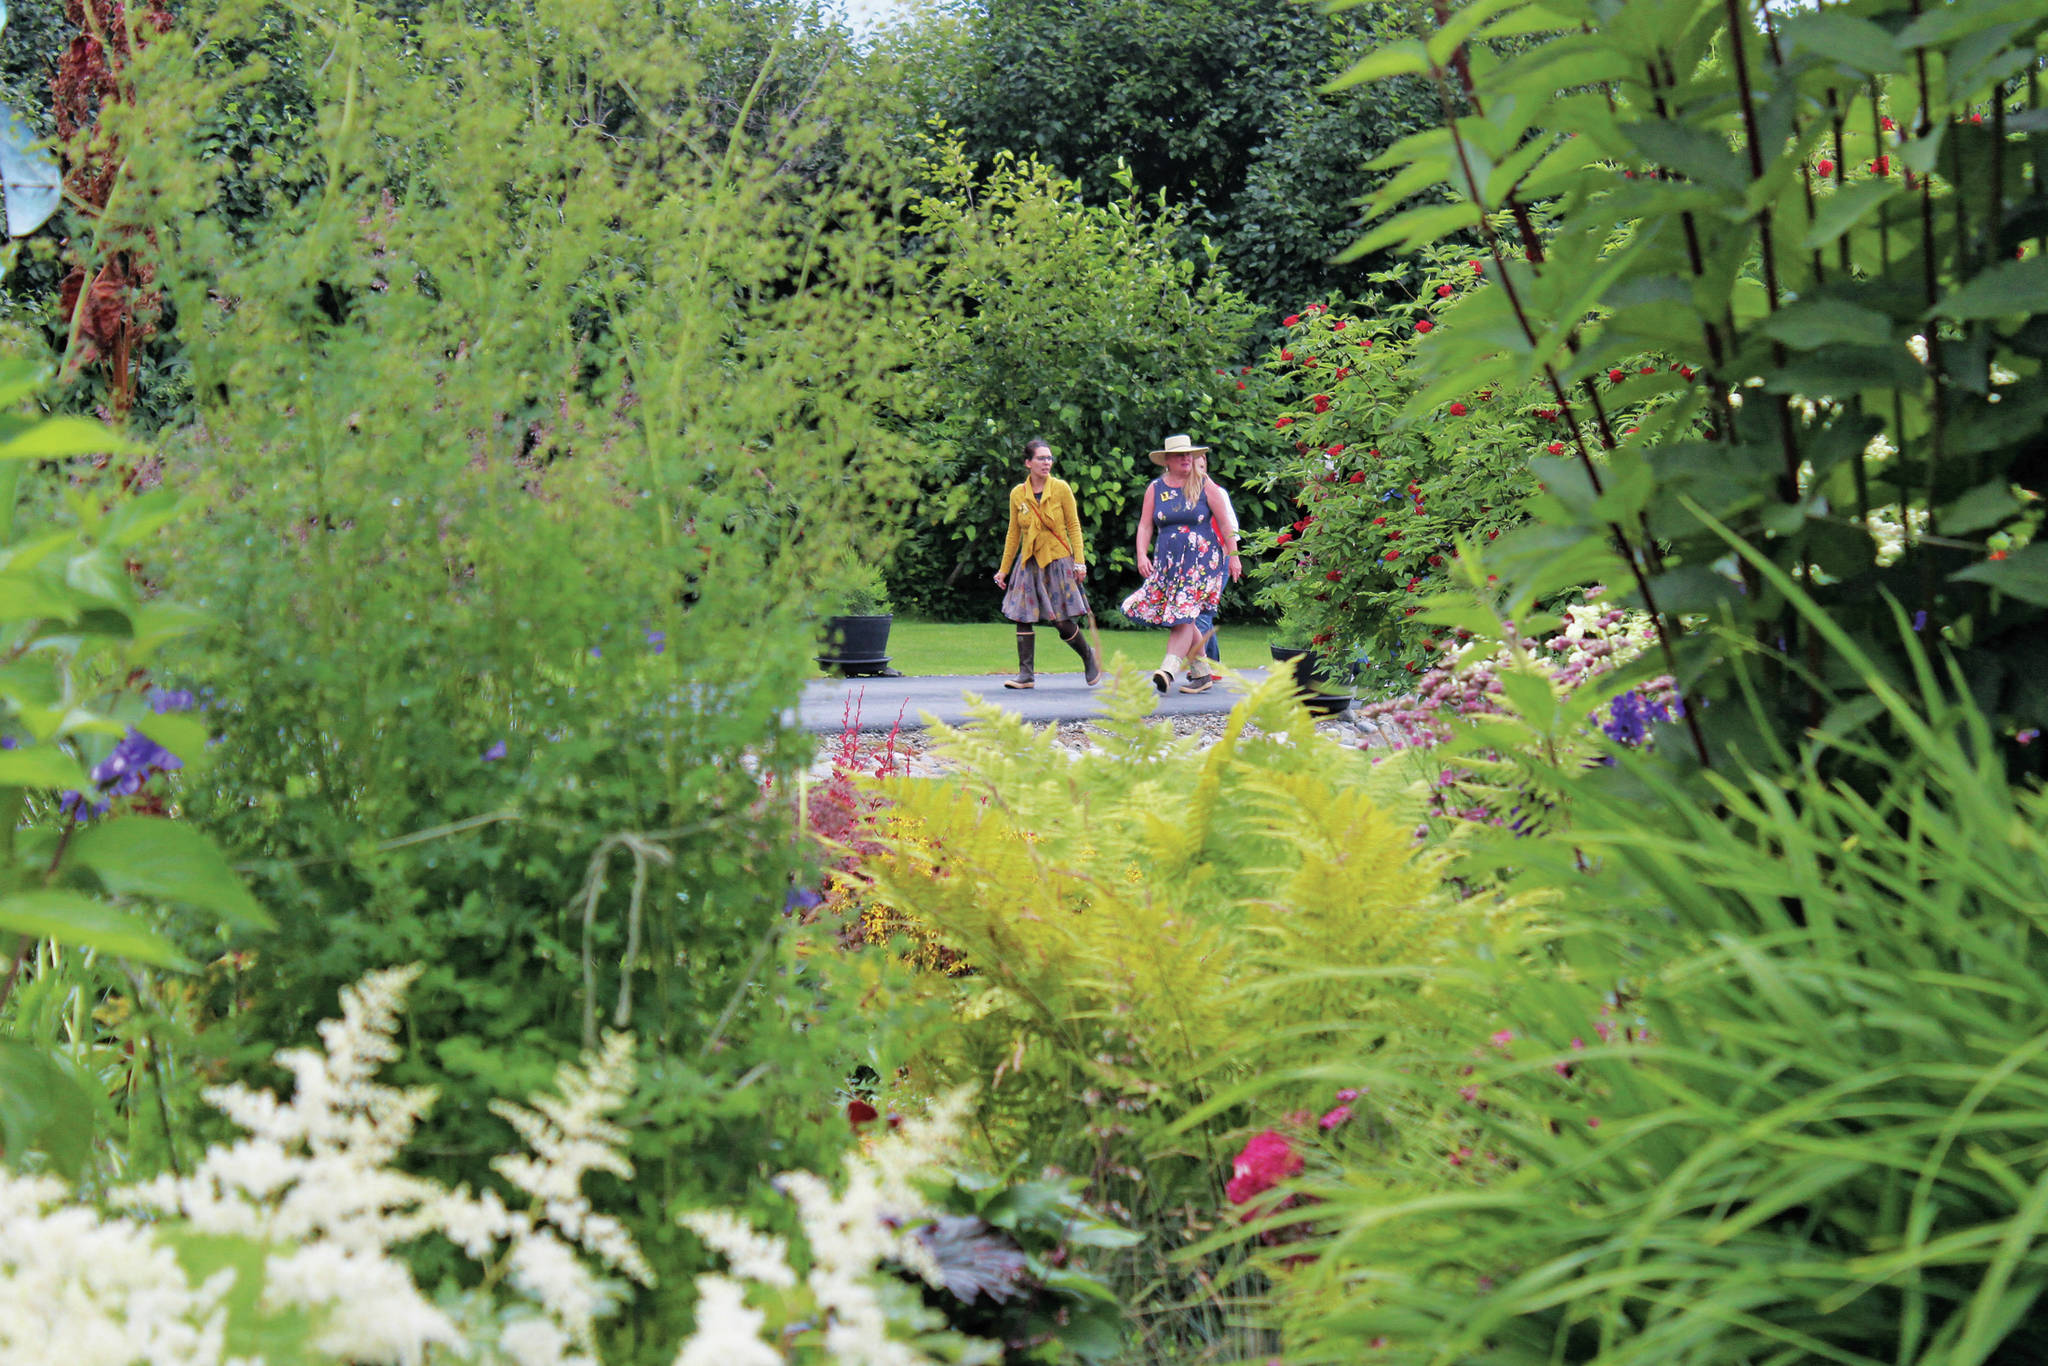 Visitors walk up to an expansive garden off of East End Road, one of five featured in this year’s Garden Tour on Sunday, July 28, 2019 in and around Homer, Alaska. (Photo by Megan Pacer/Homer News)